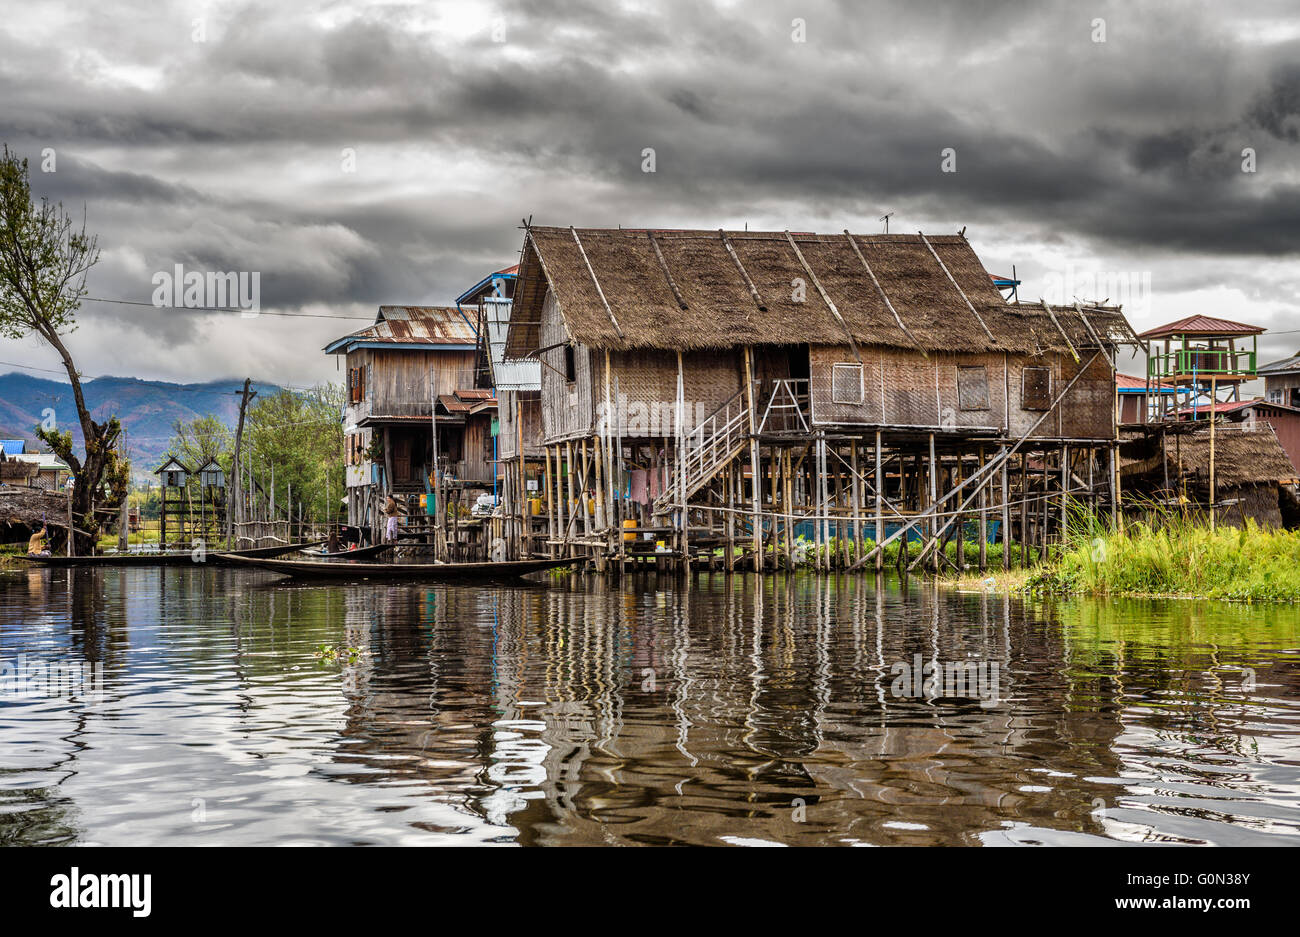 Wooden houses on piles inhabited by the tribe of Inthar, Inle Lake, Myanmar Stock Photo